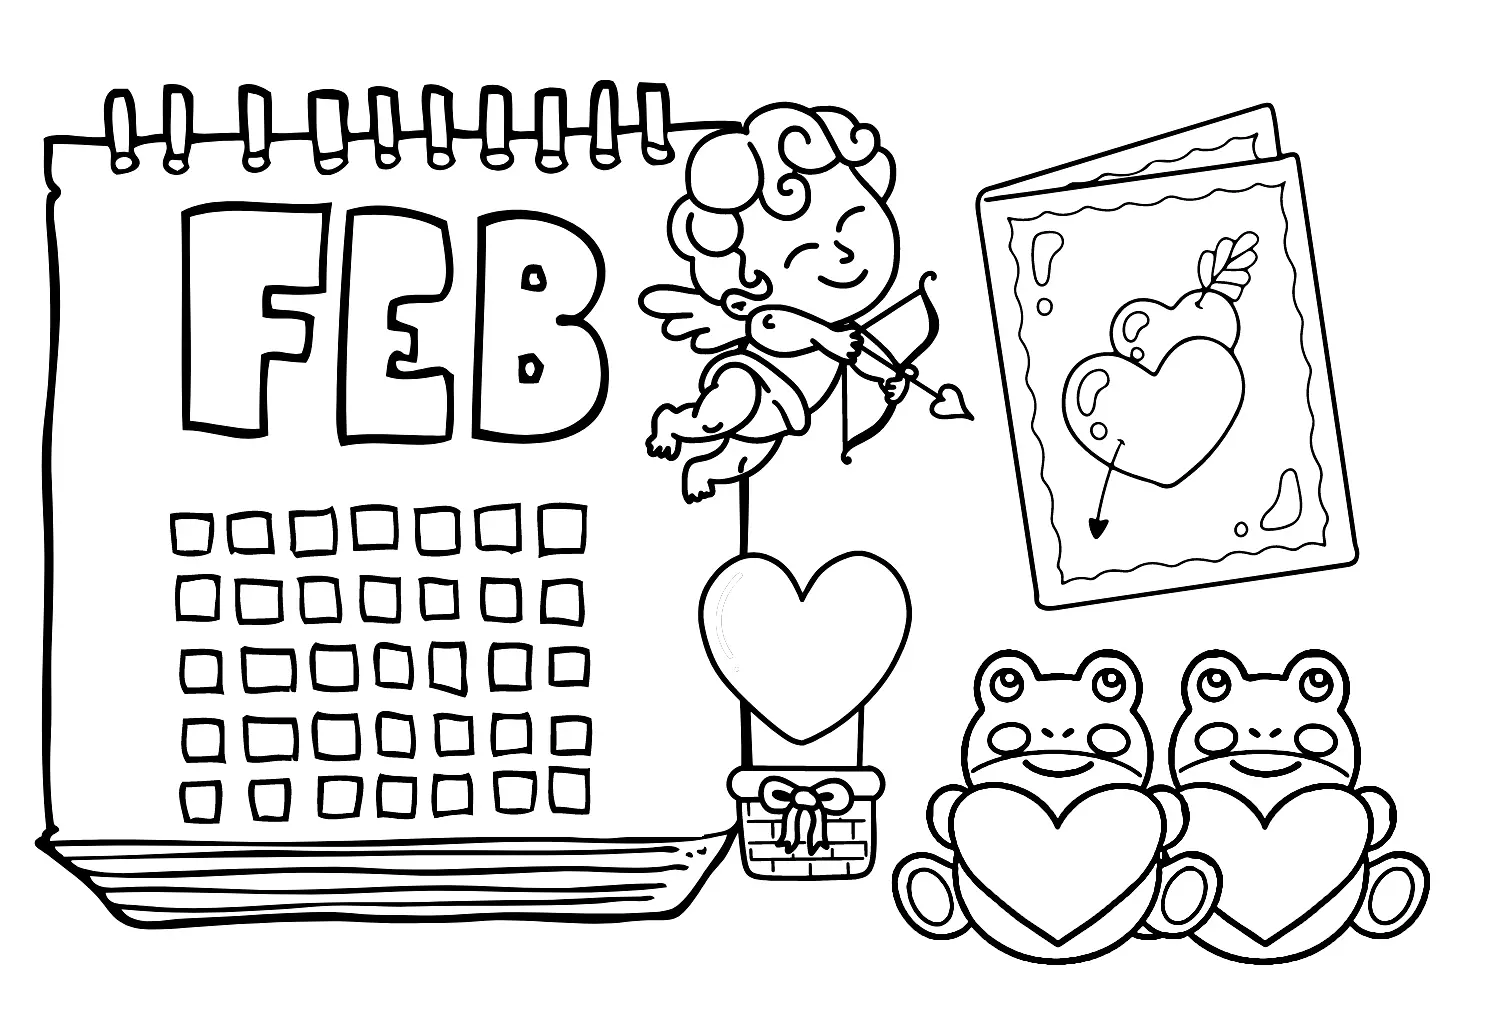 Leap Year Coloring Pages